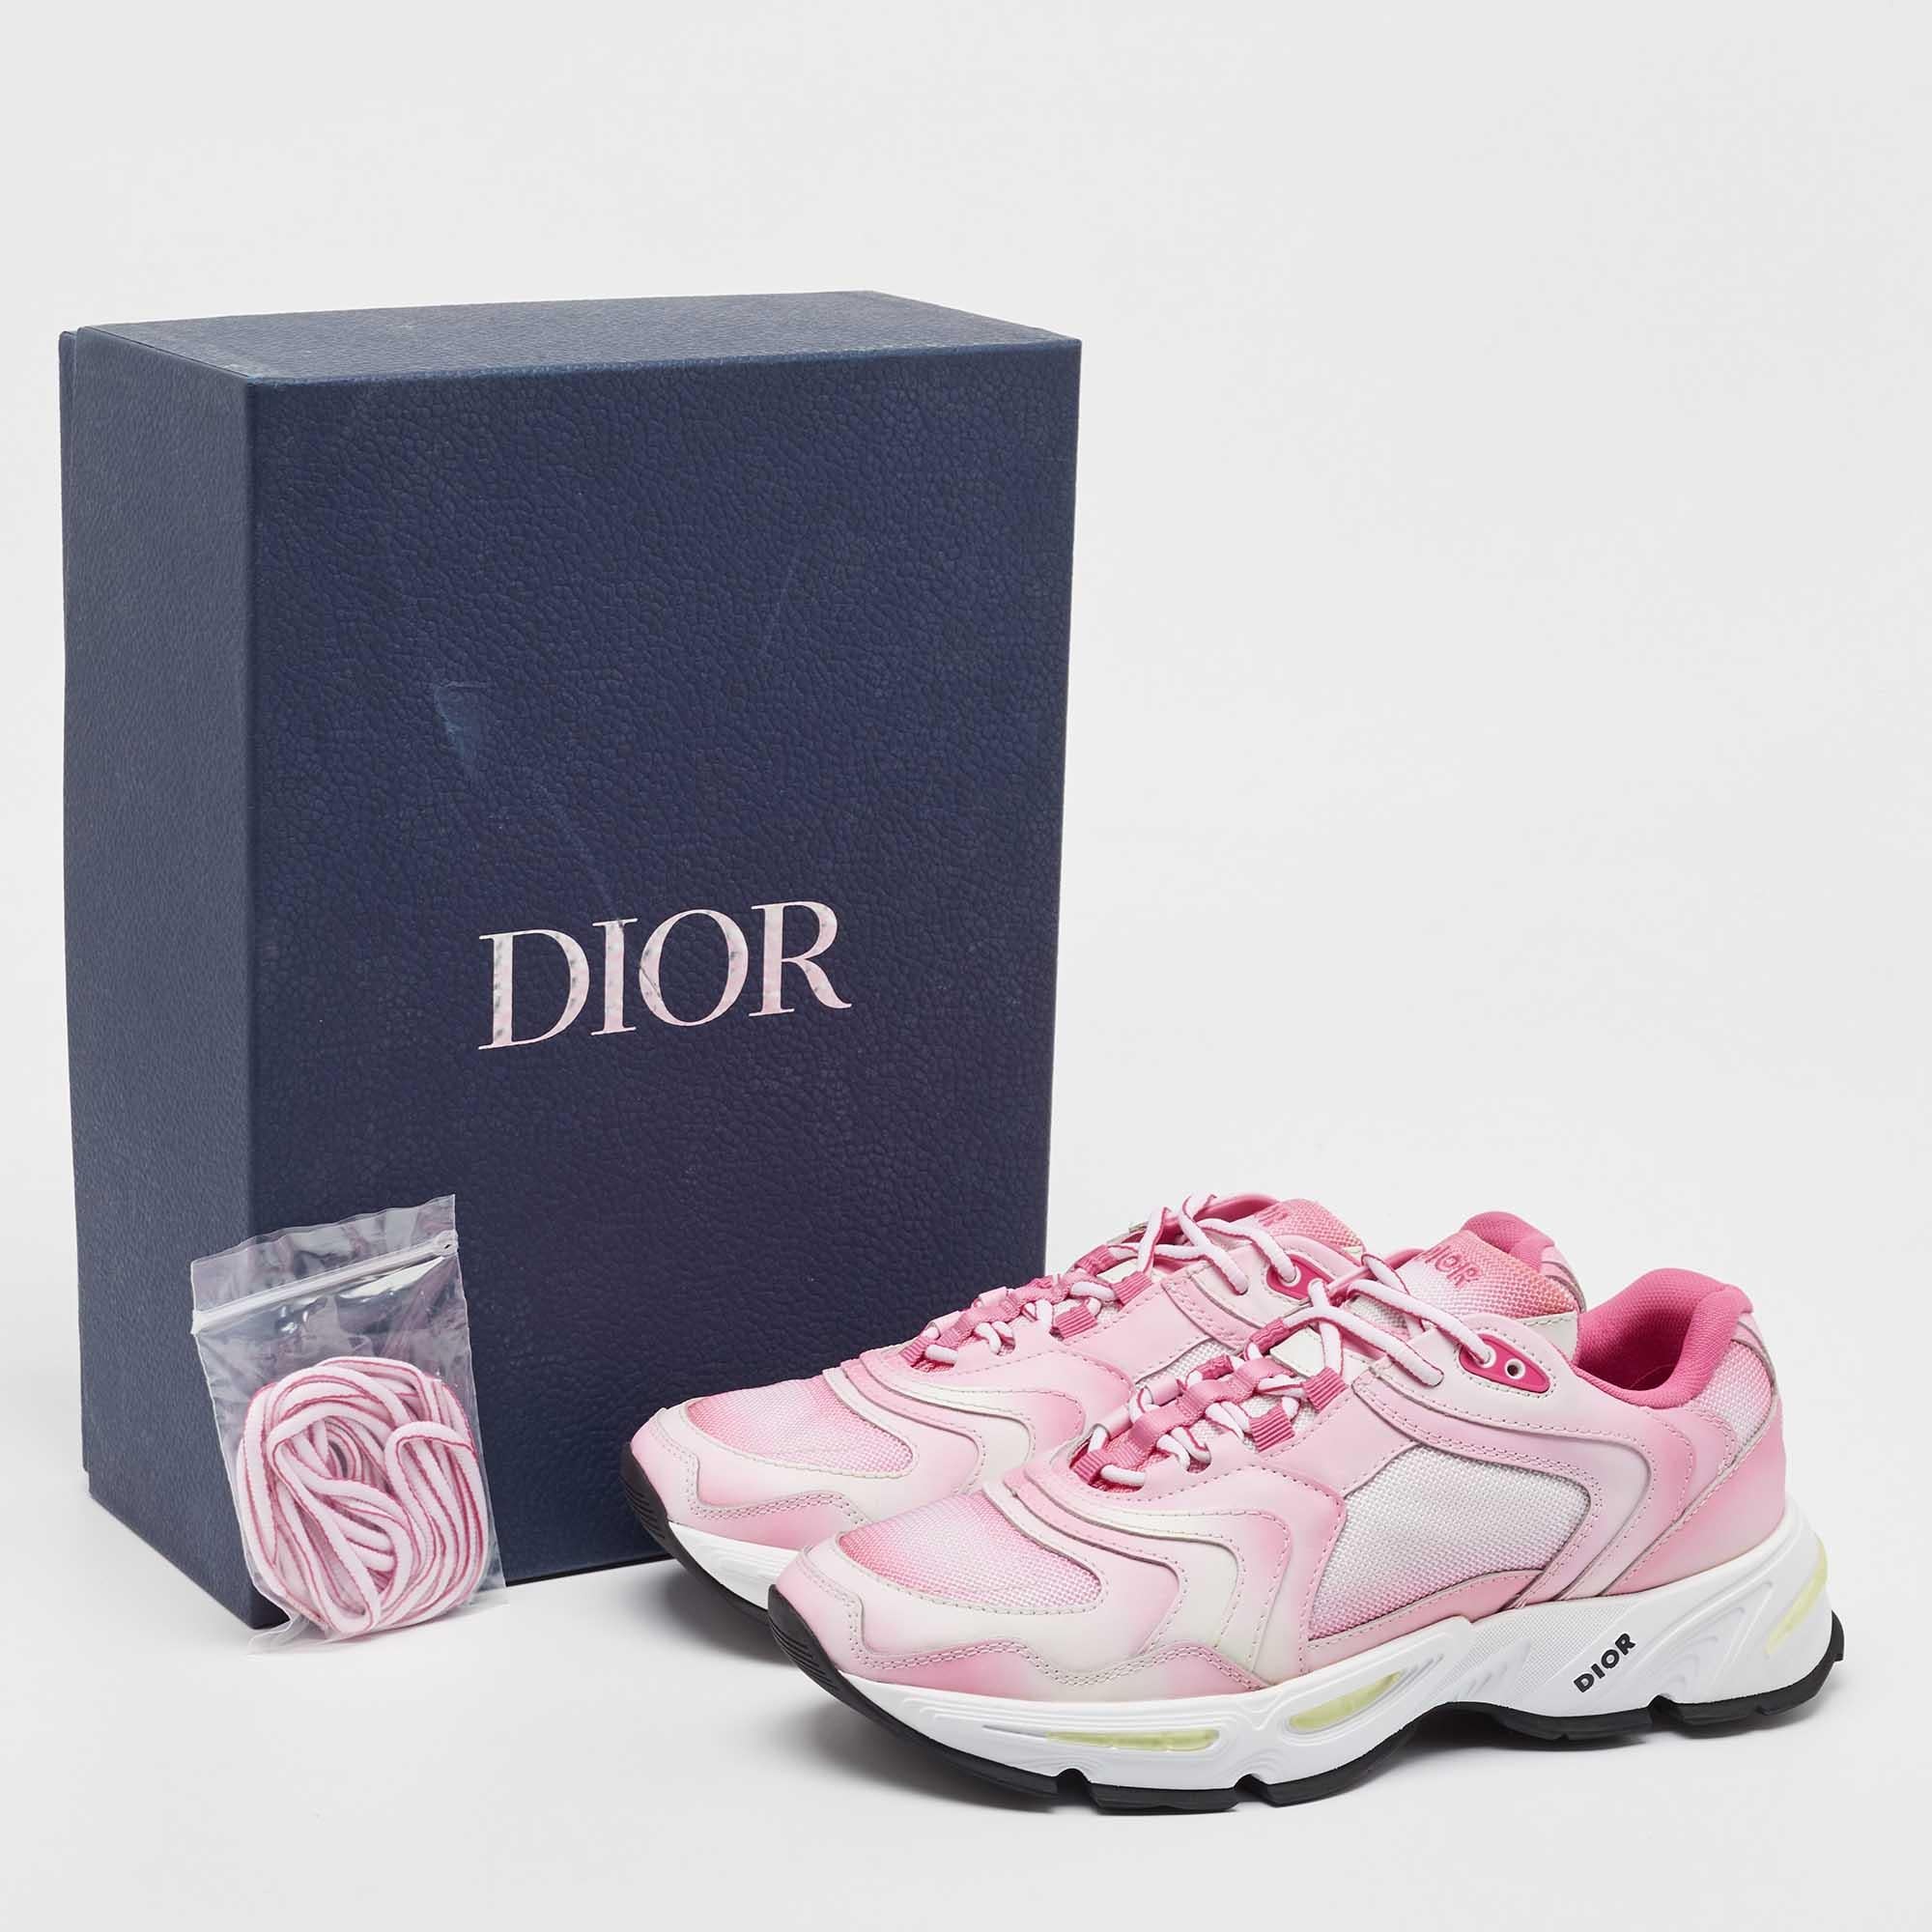 DIOR Pink/White Mesh and Leather CD1 Gradient Sneakers Size 41 For Sale 5